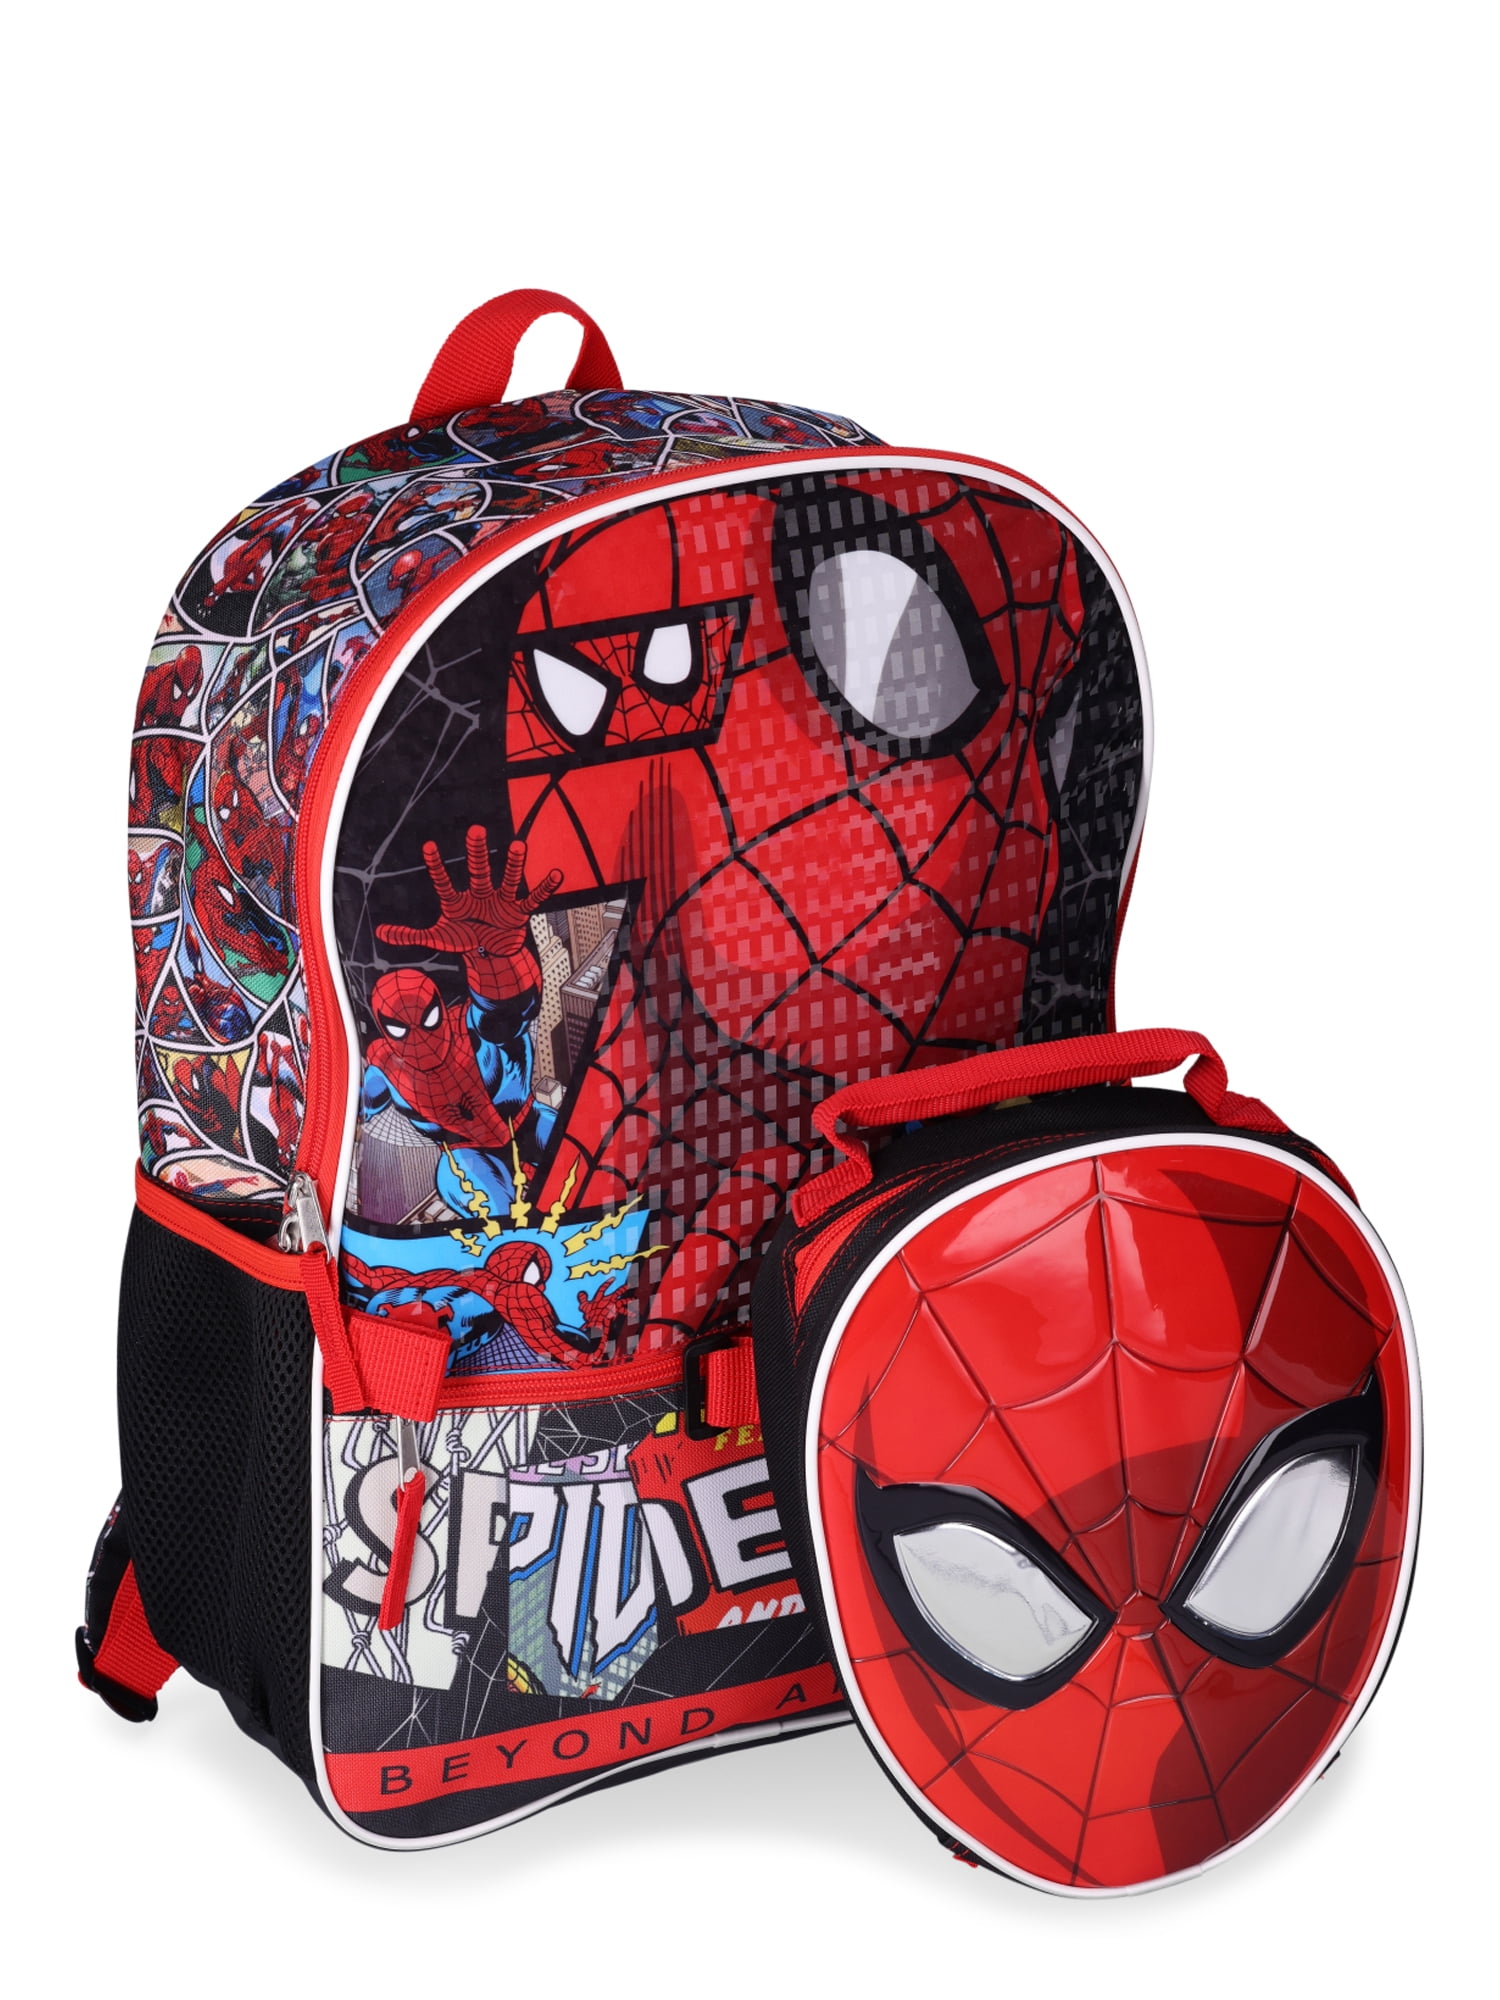 Marvel Spiderman Kids Backpack with Lunch Box, 2-Piece - Walmart.com